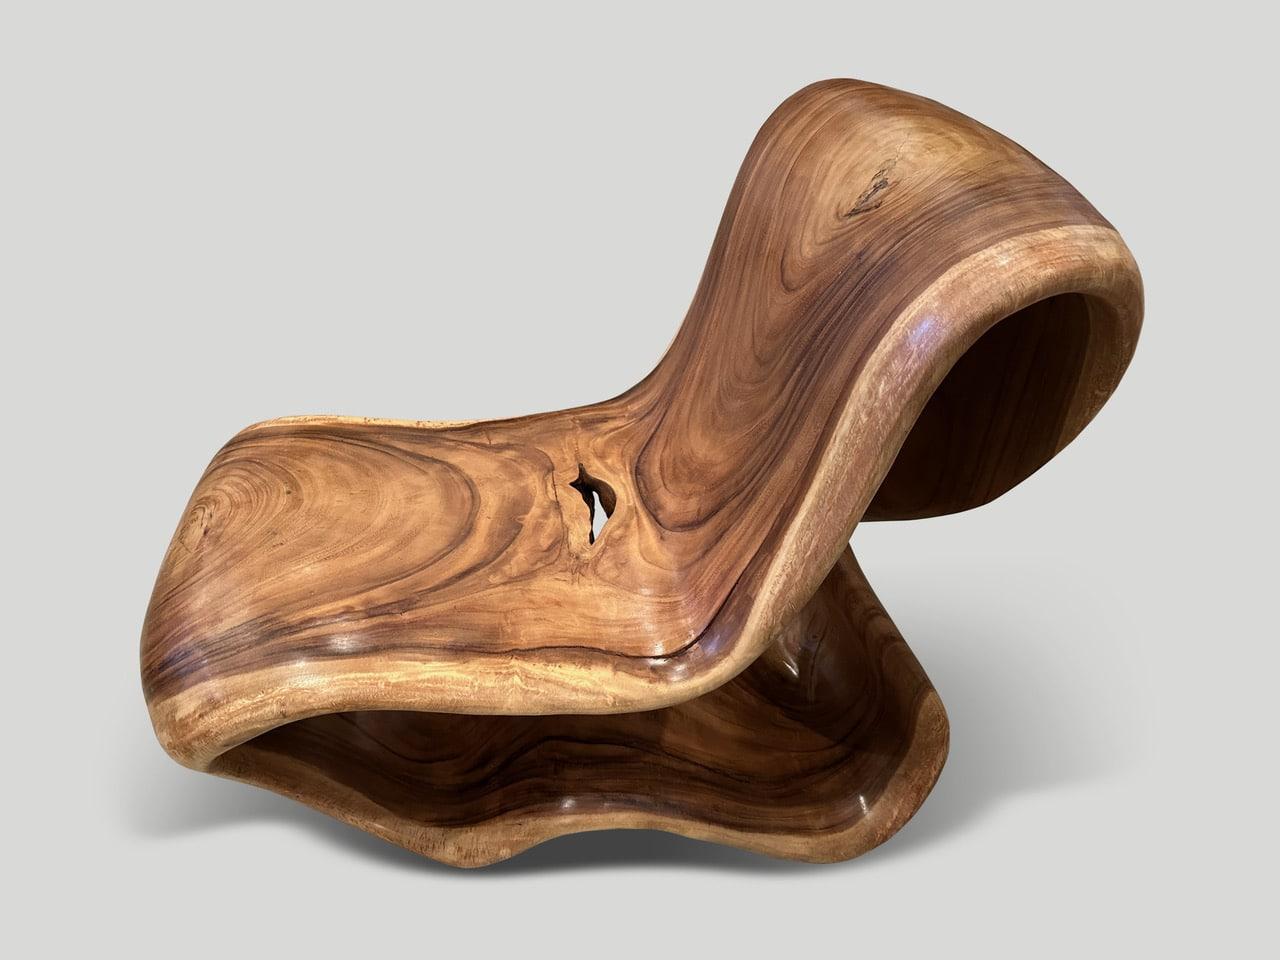 Impressive one of a kind chair made from a single piece of suar wood and carved seamlessly from one piece of wood. We finished this rare piece with a natural oil revealing the beautiful wood grain. Both usable and a piece of art. Full dimensions;